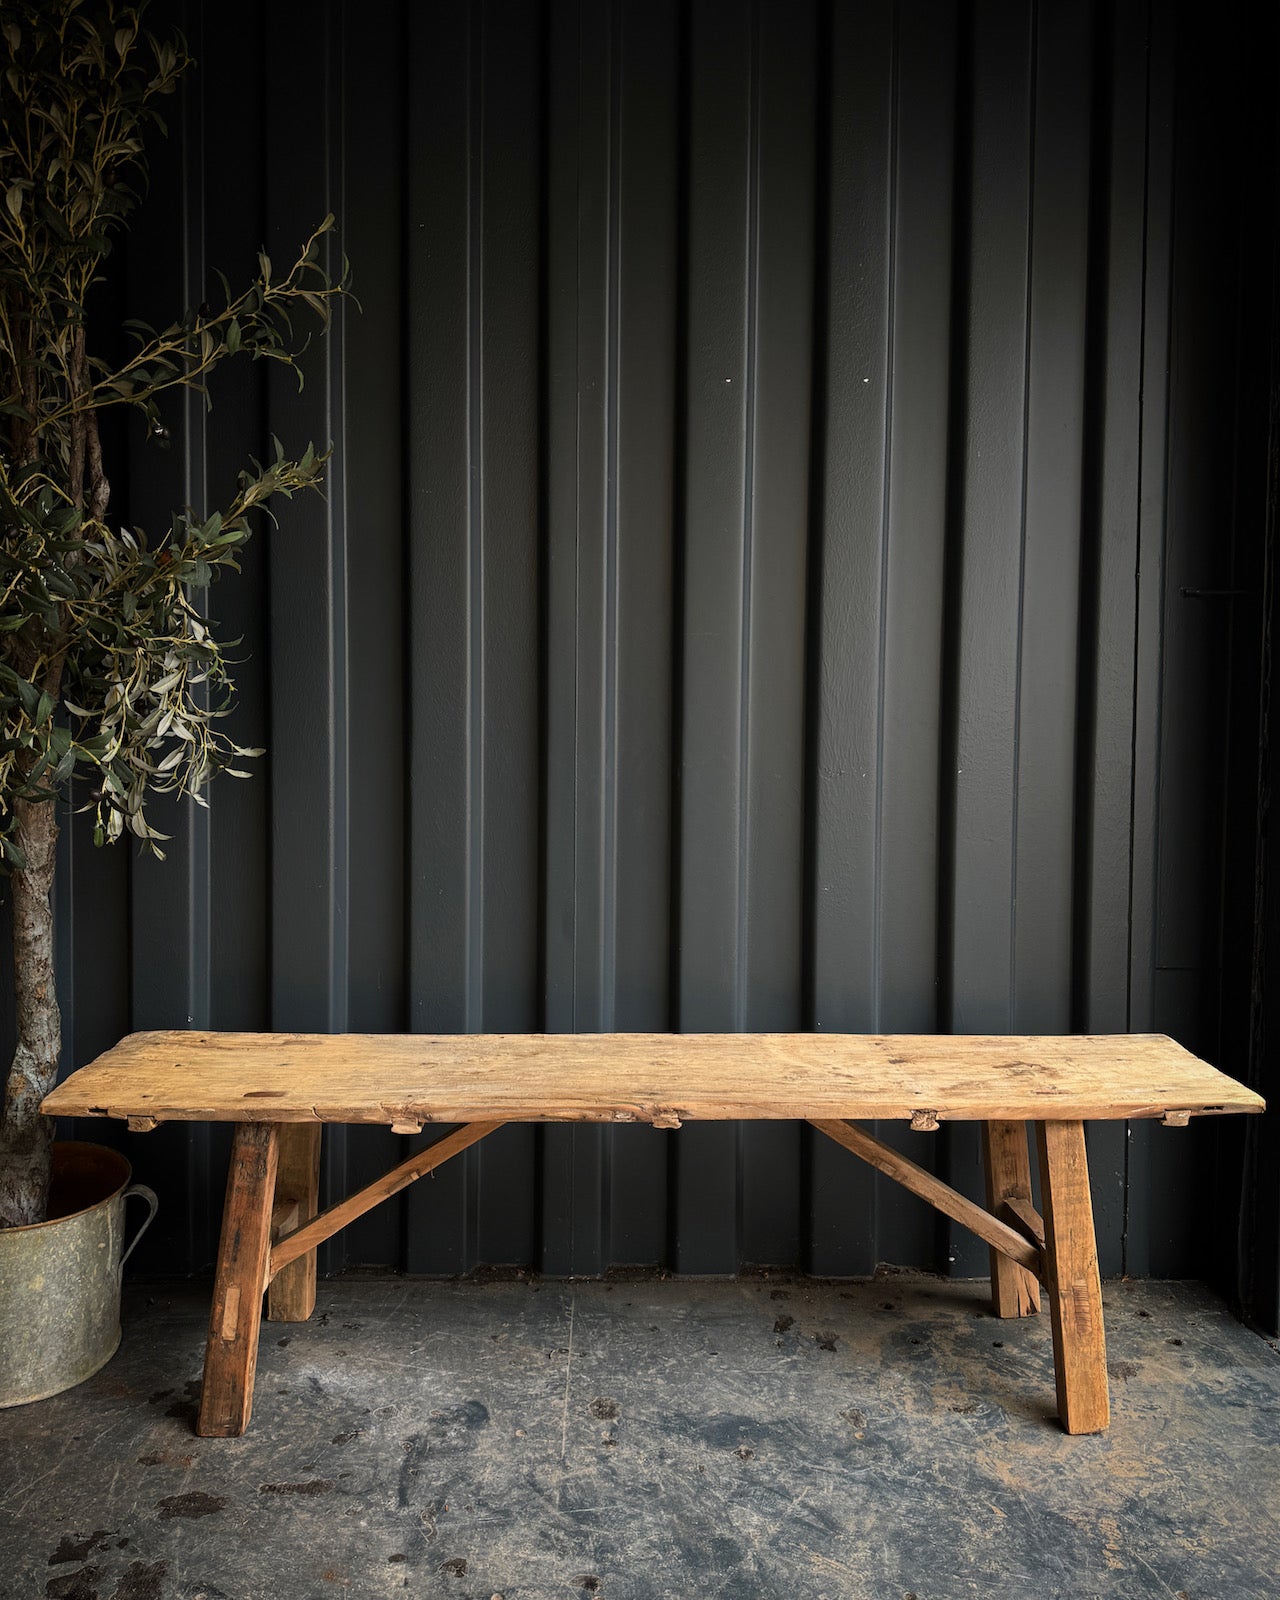 Lovely wide rustic bench